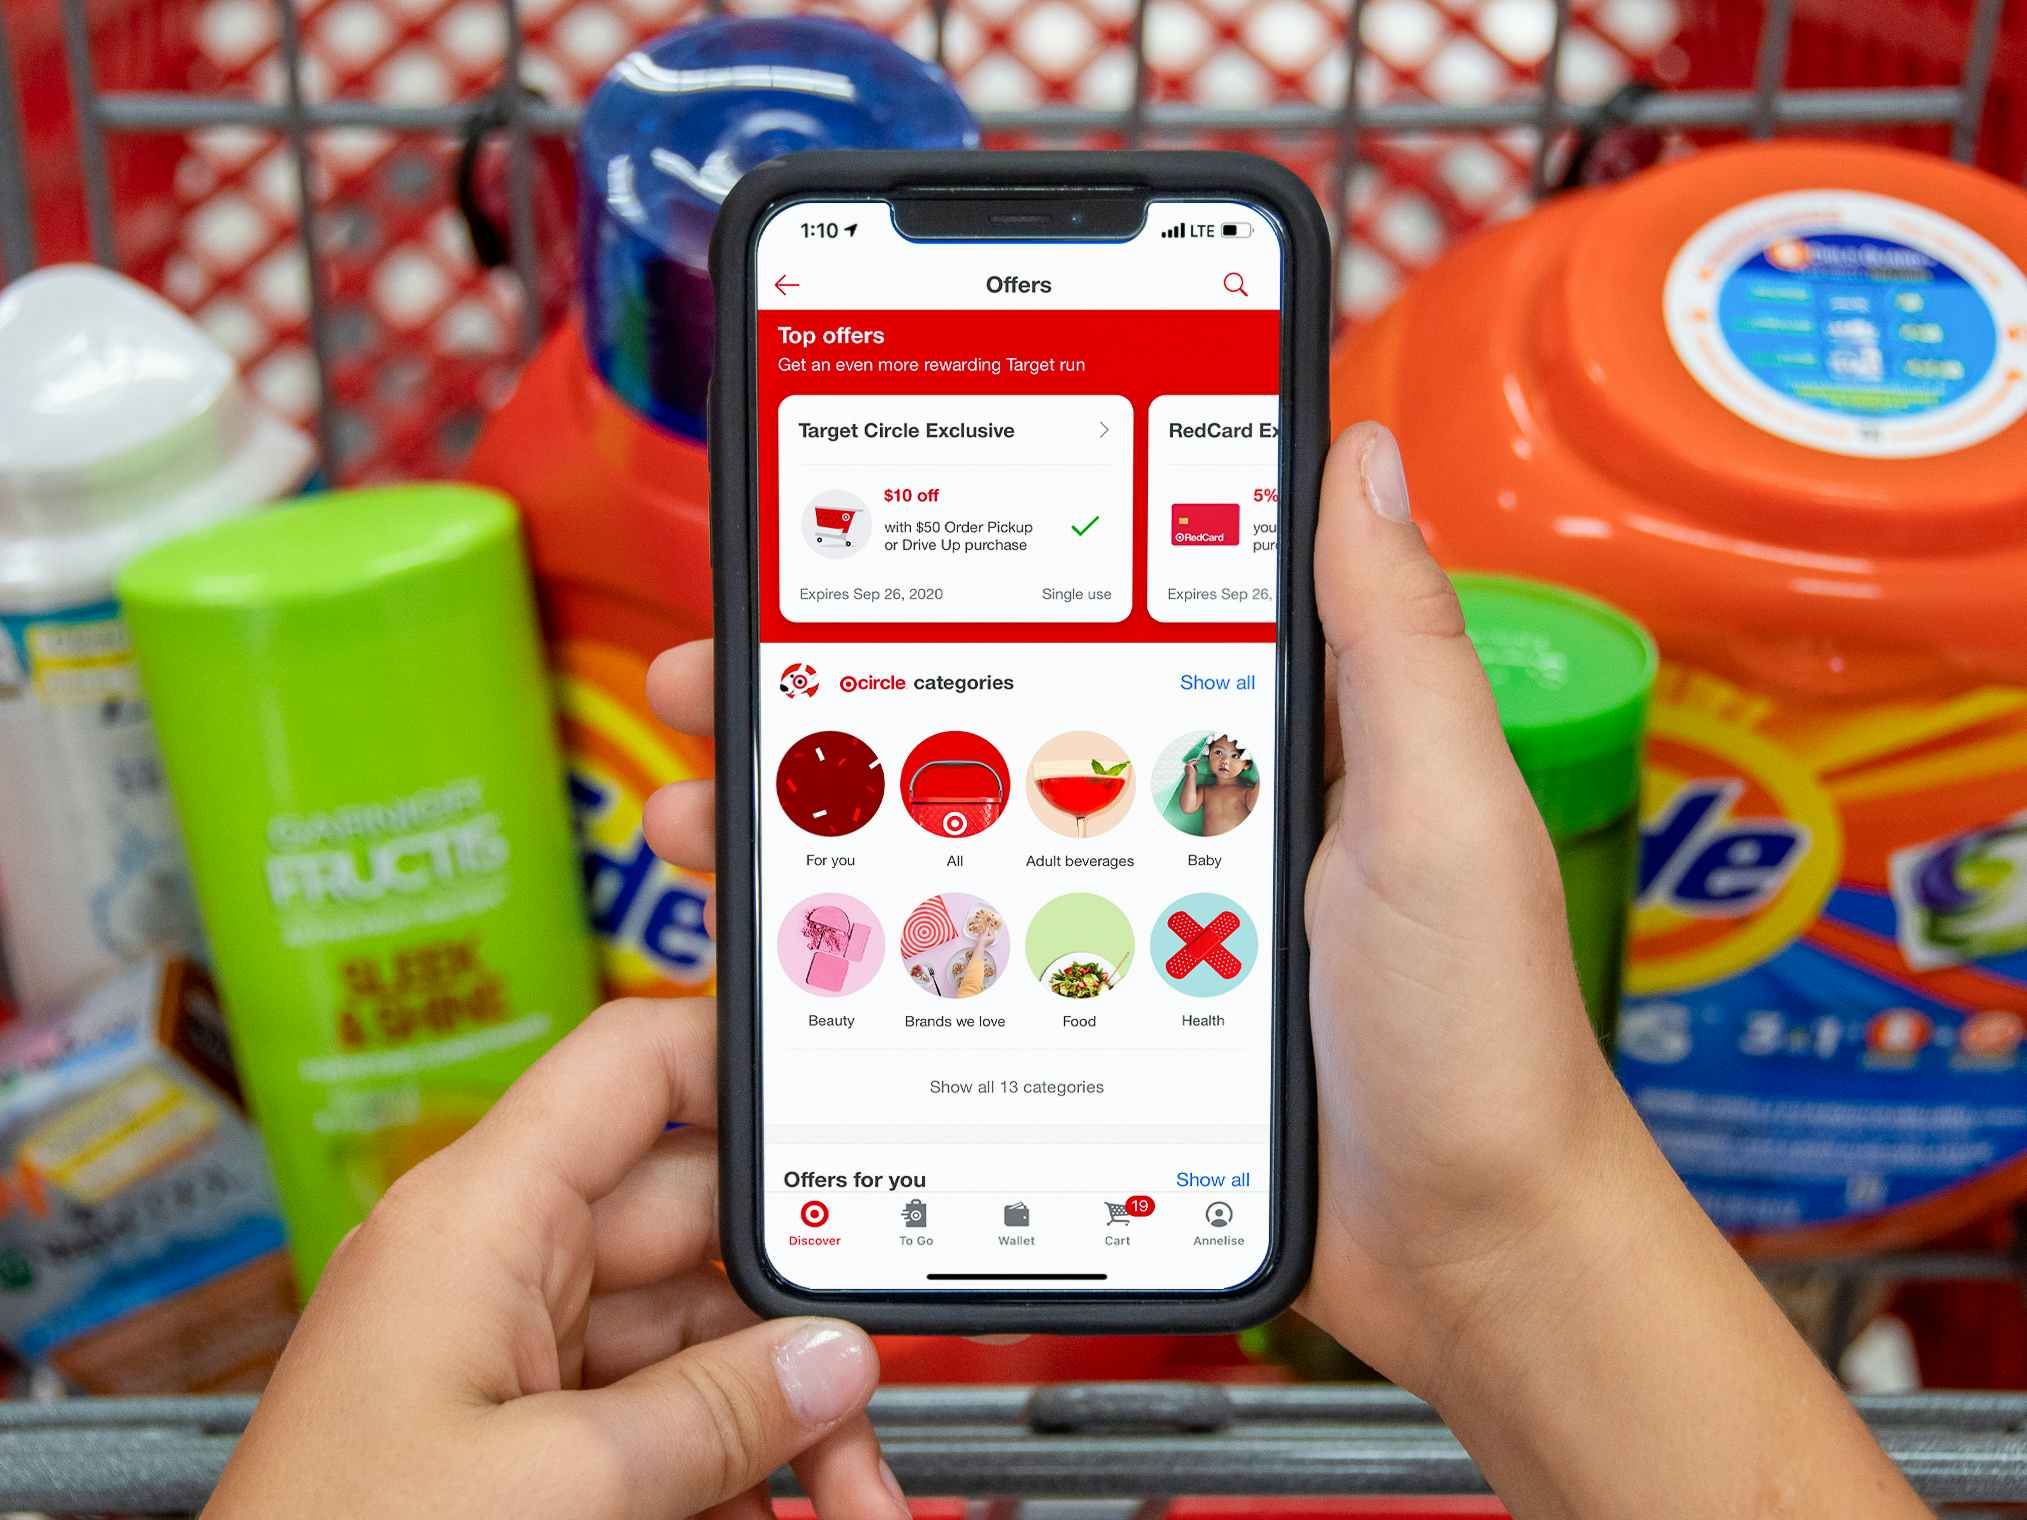 A person's hands holding a phone displaying the Target mobile app's Offers page in front of a Target shopping cart's basket filled with products.